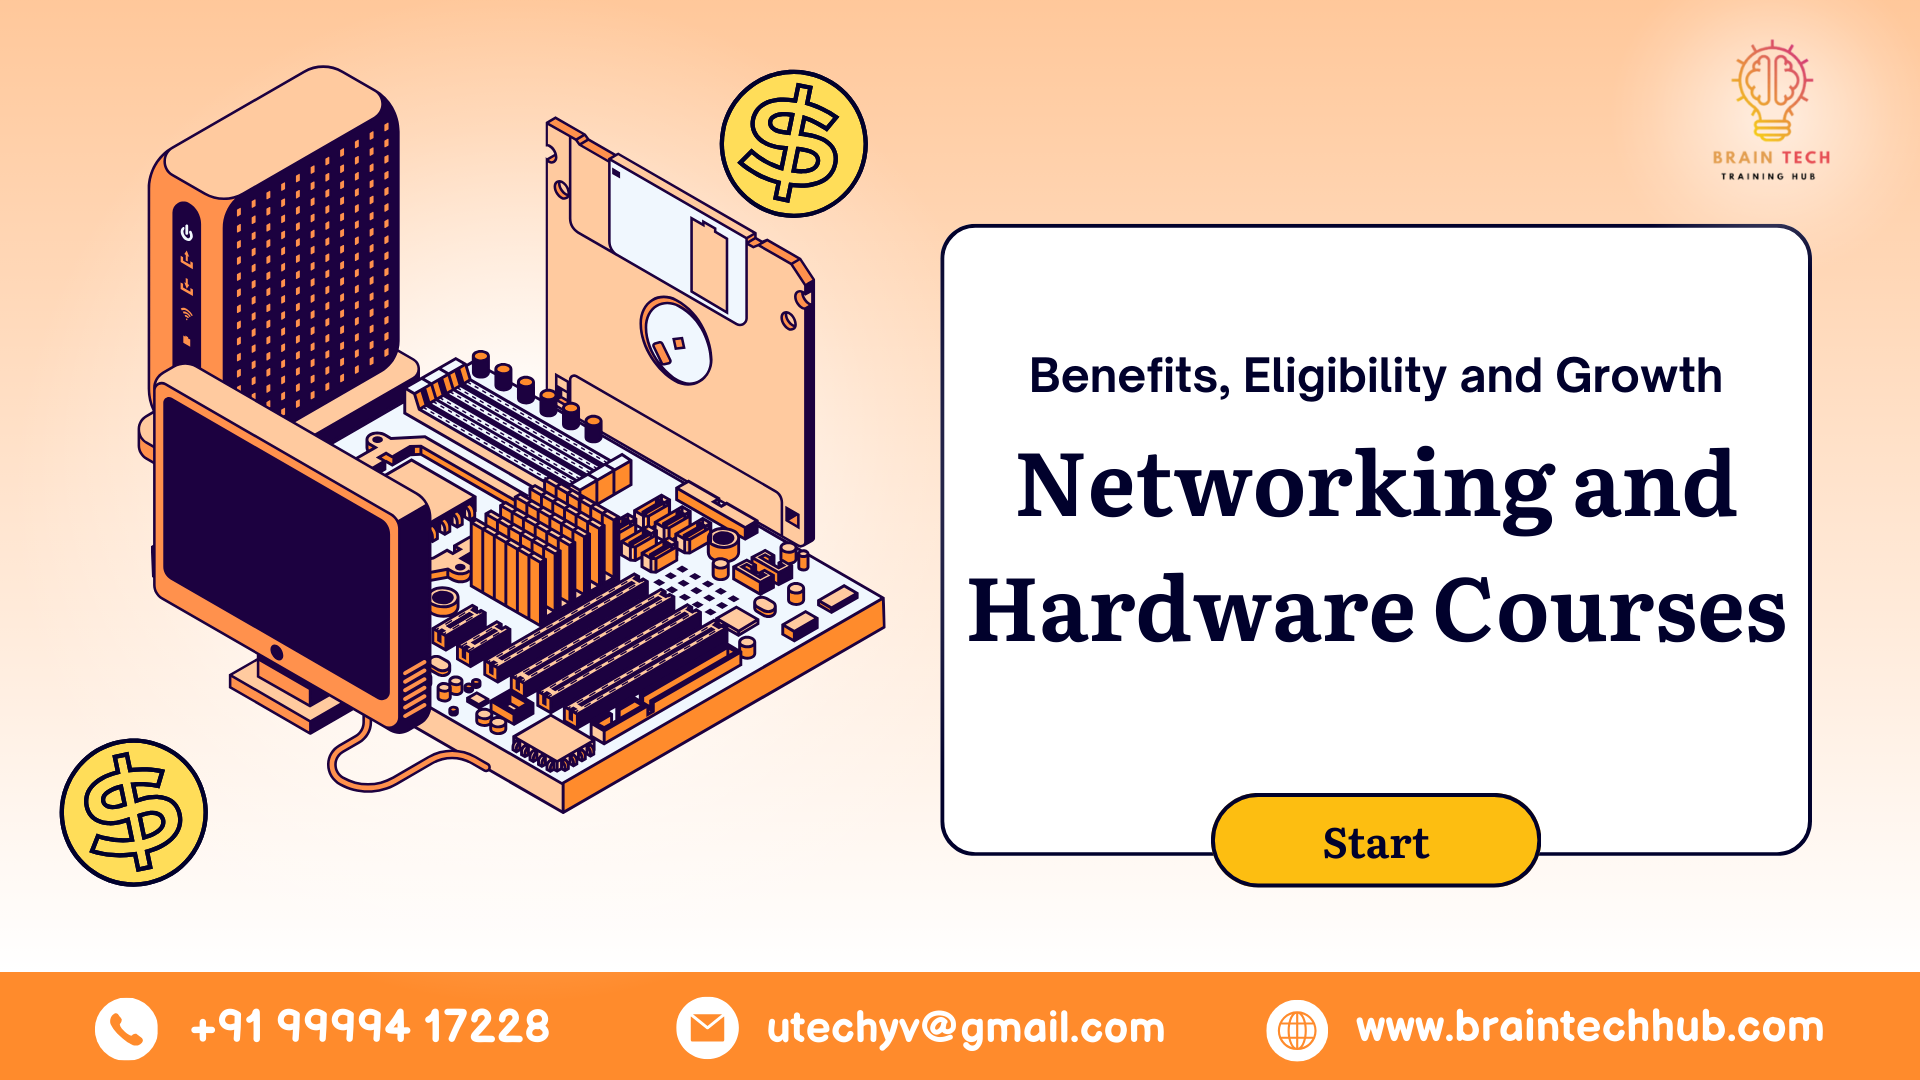 Networking and Hardware Courses: Benefits, Eligibility and Growth